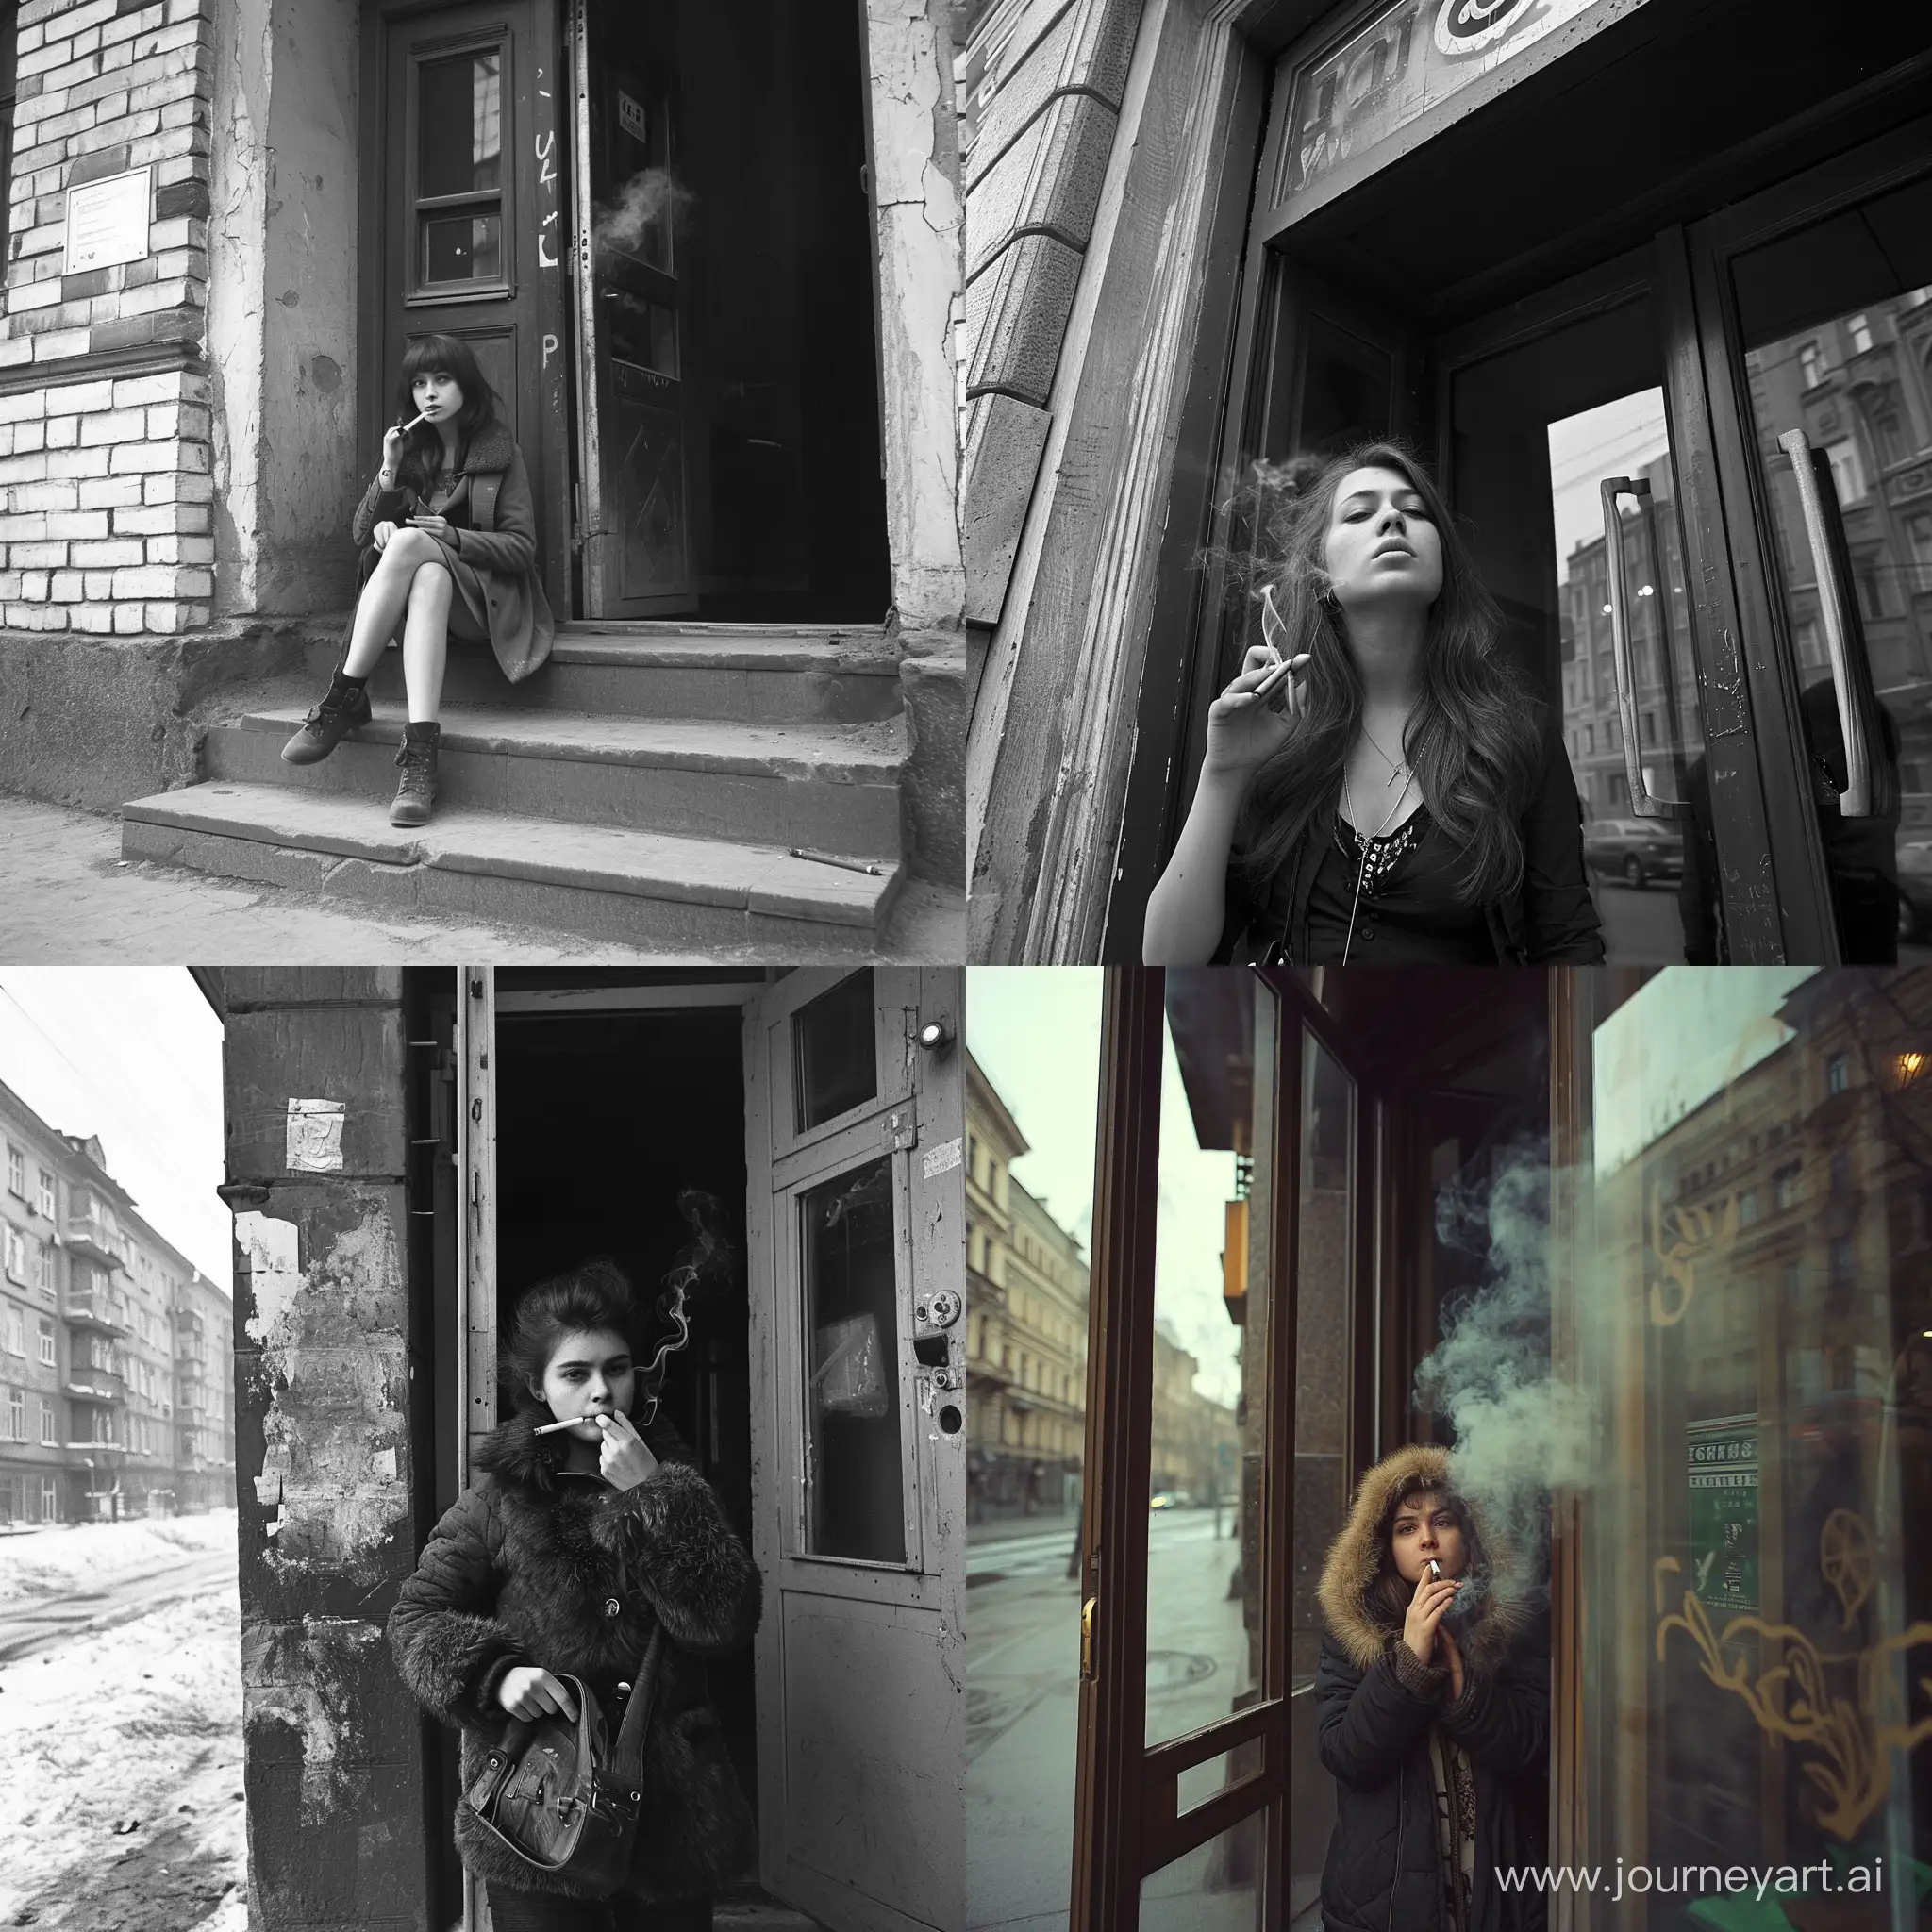 A Russian girl smoking in the entrance of a five-storey building